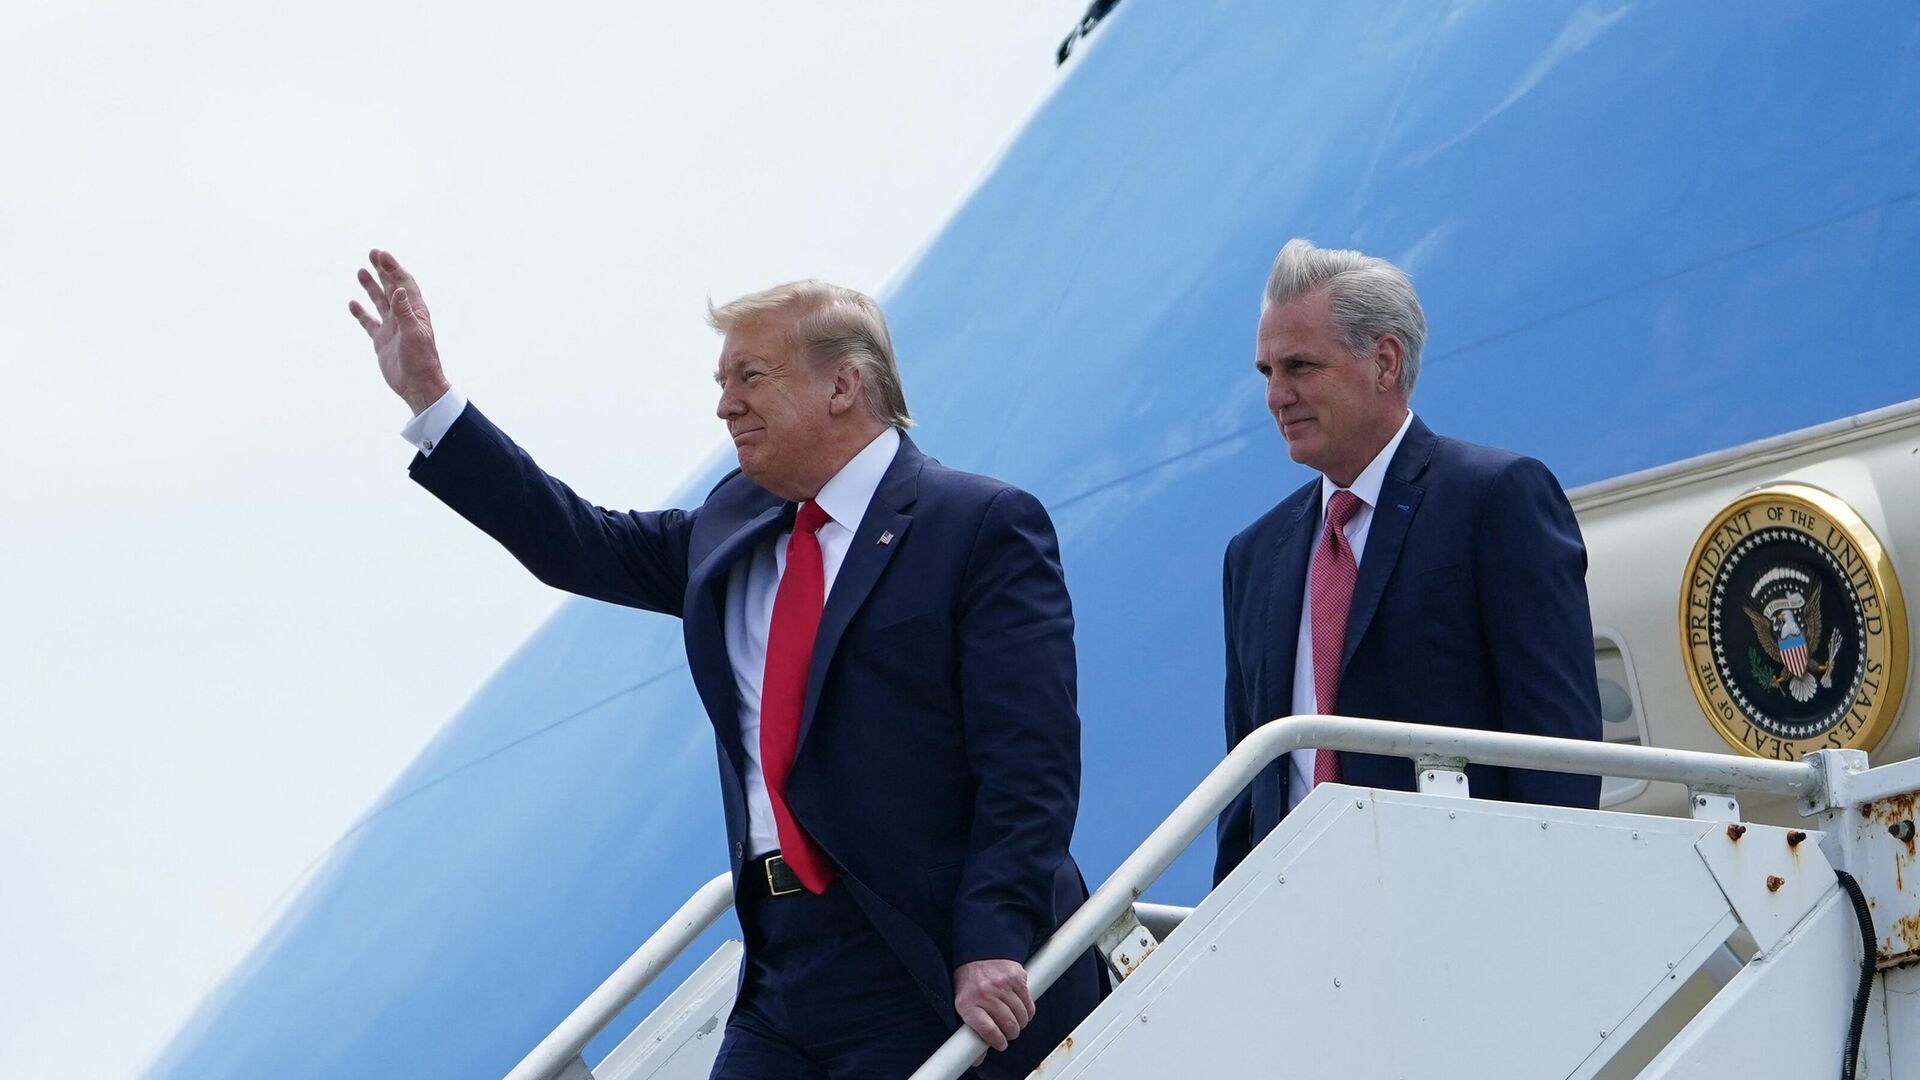 US President Donald Trump waves as he arrives as US Representative Kevin McCarthy(R-CA) looks on at Cape Canaveral, Florida on May 30, 2020. Trump travelled  to the Kennedy Space Center in Florida to watch the launch of the manned SpaceX Demo-2 mission to the International Space Station. - Sputnik International, 1920, 28.06.2023